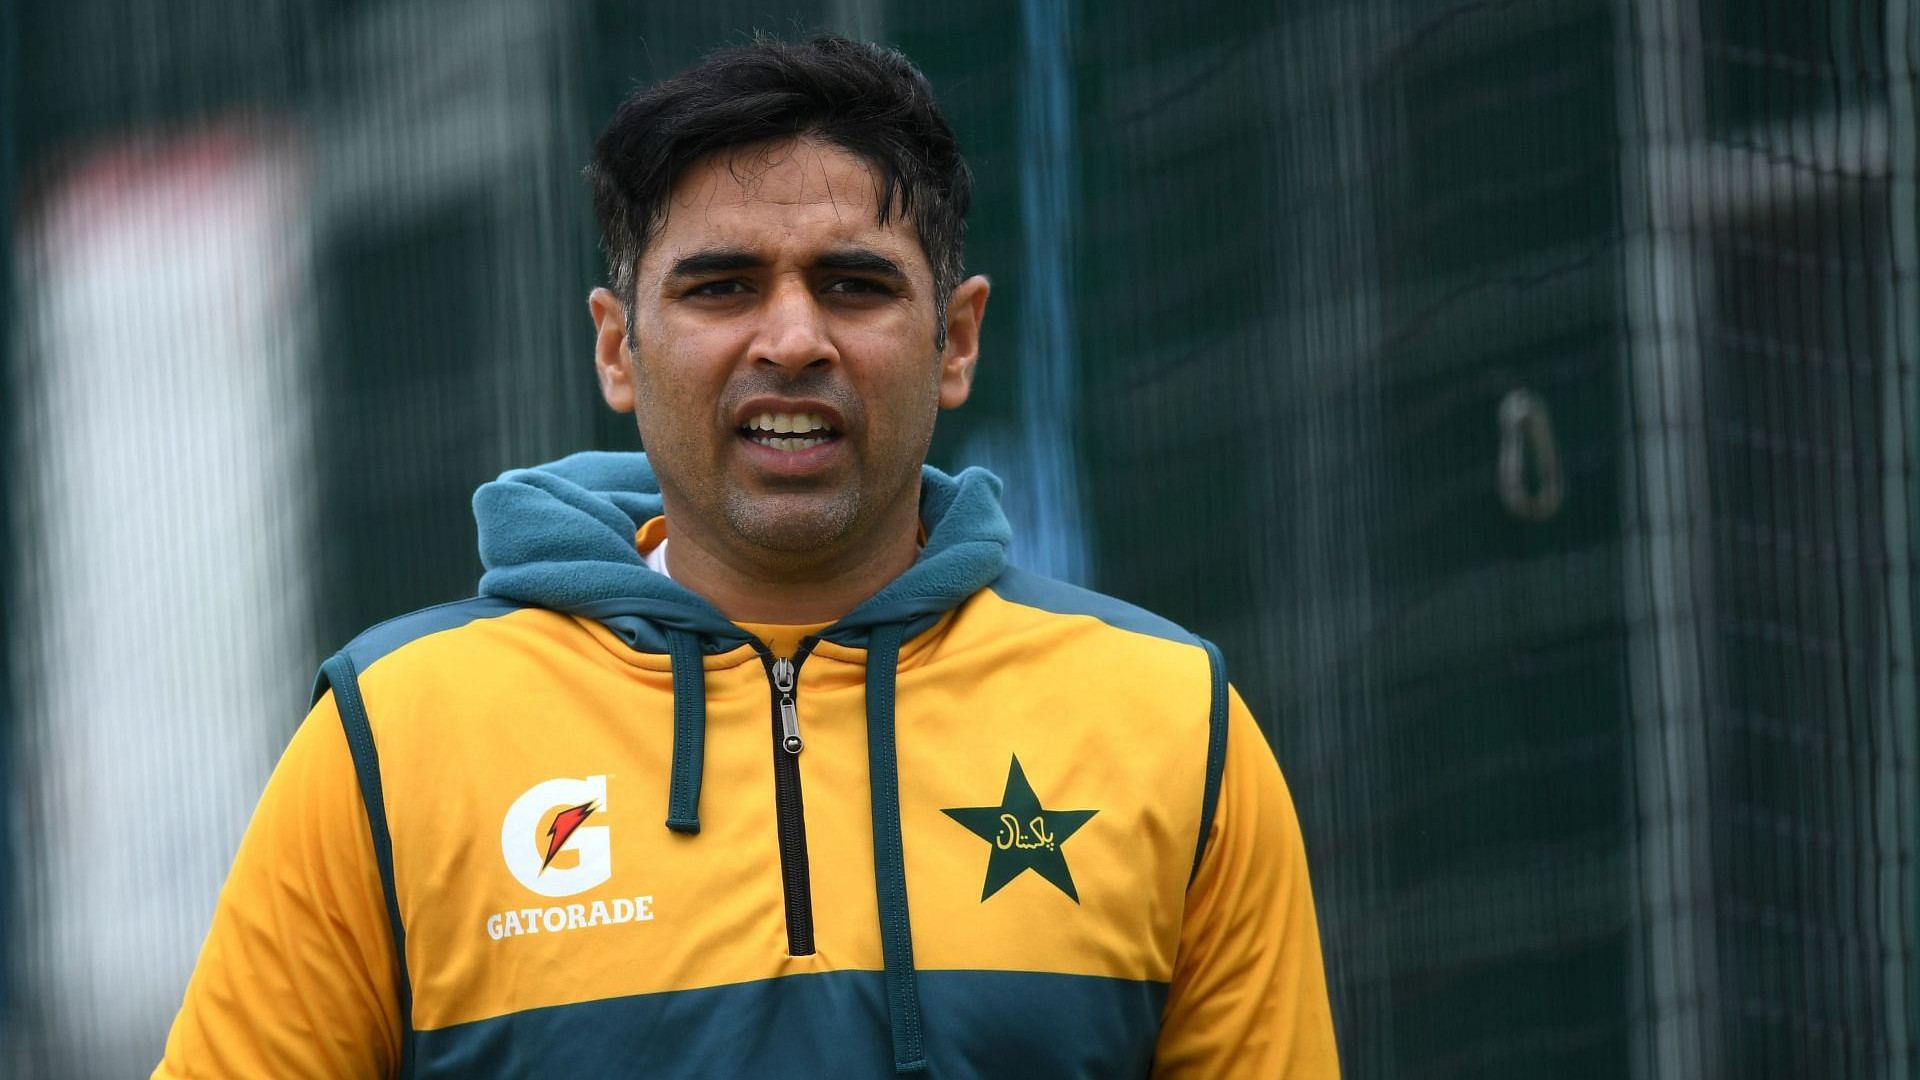 Pakistan's Abid Ali undergoes angioplasty a day after being hospitalized for chest pains: Report